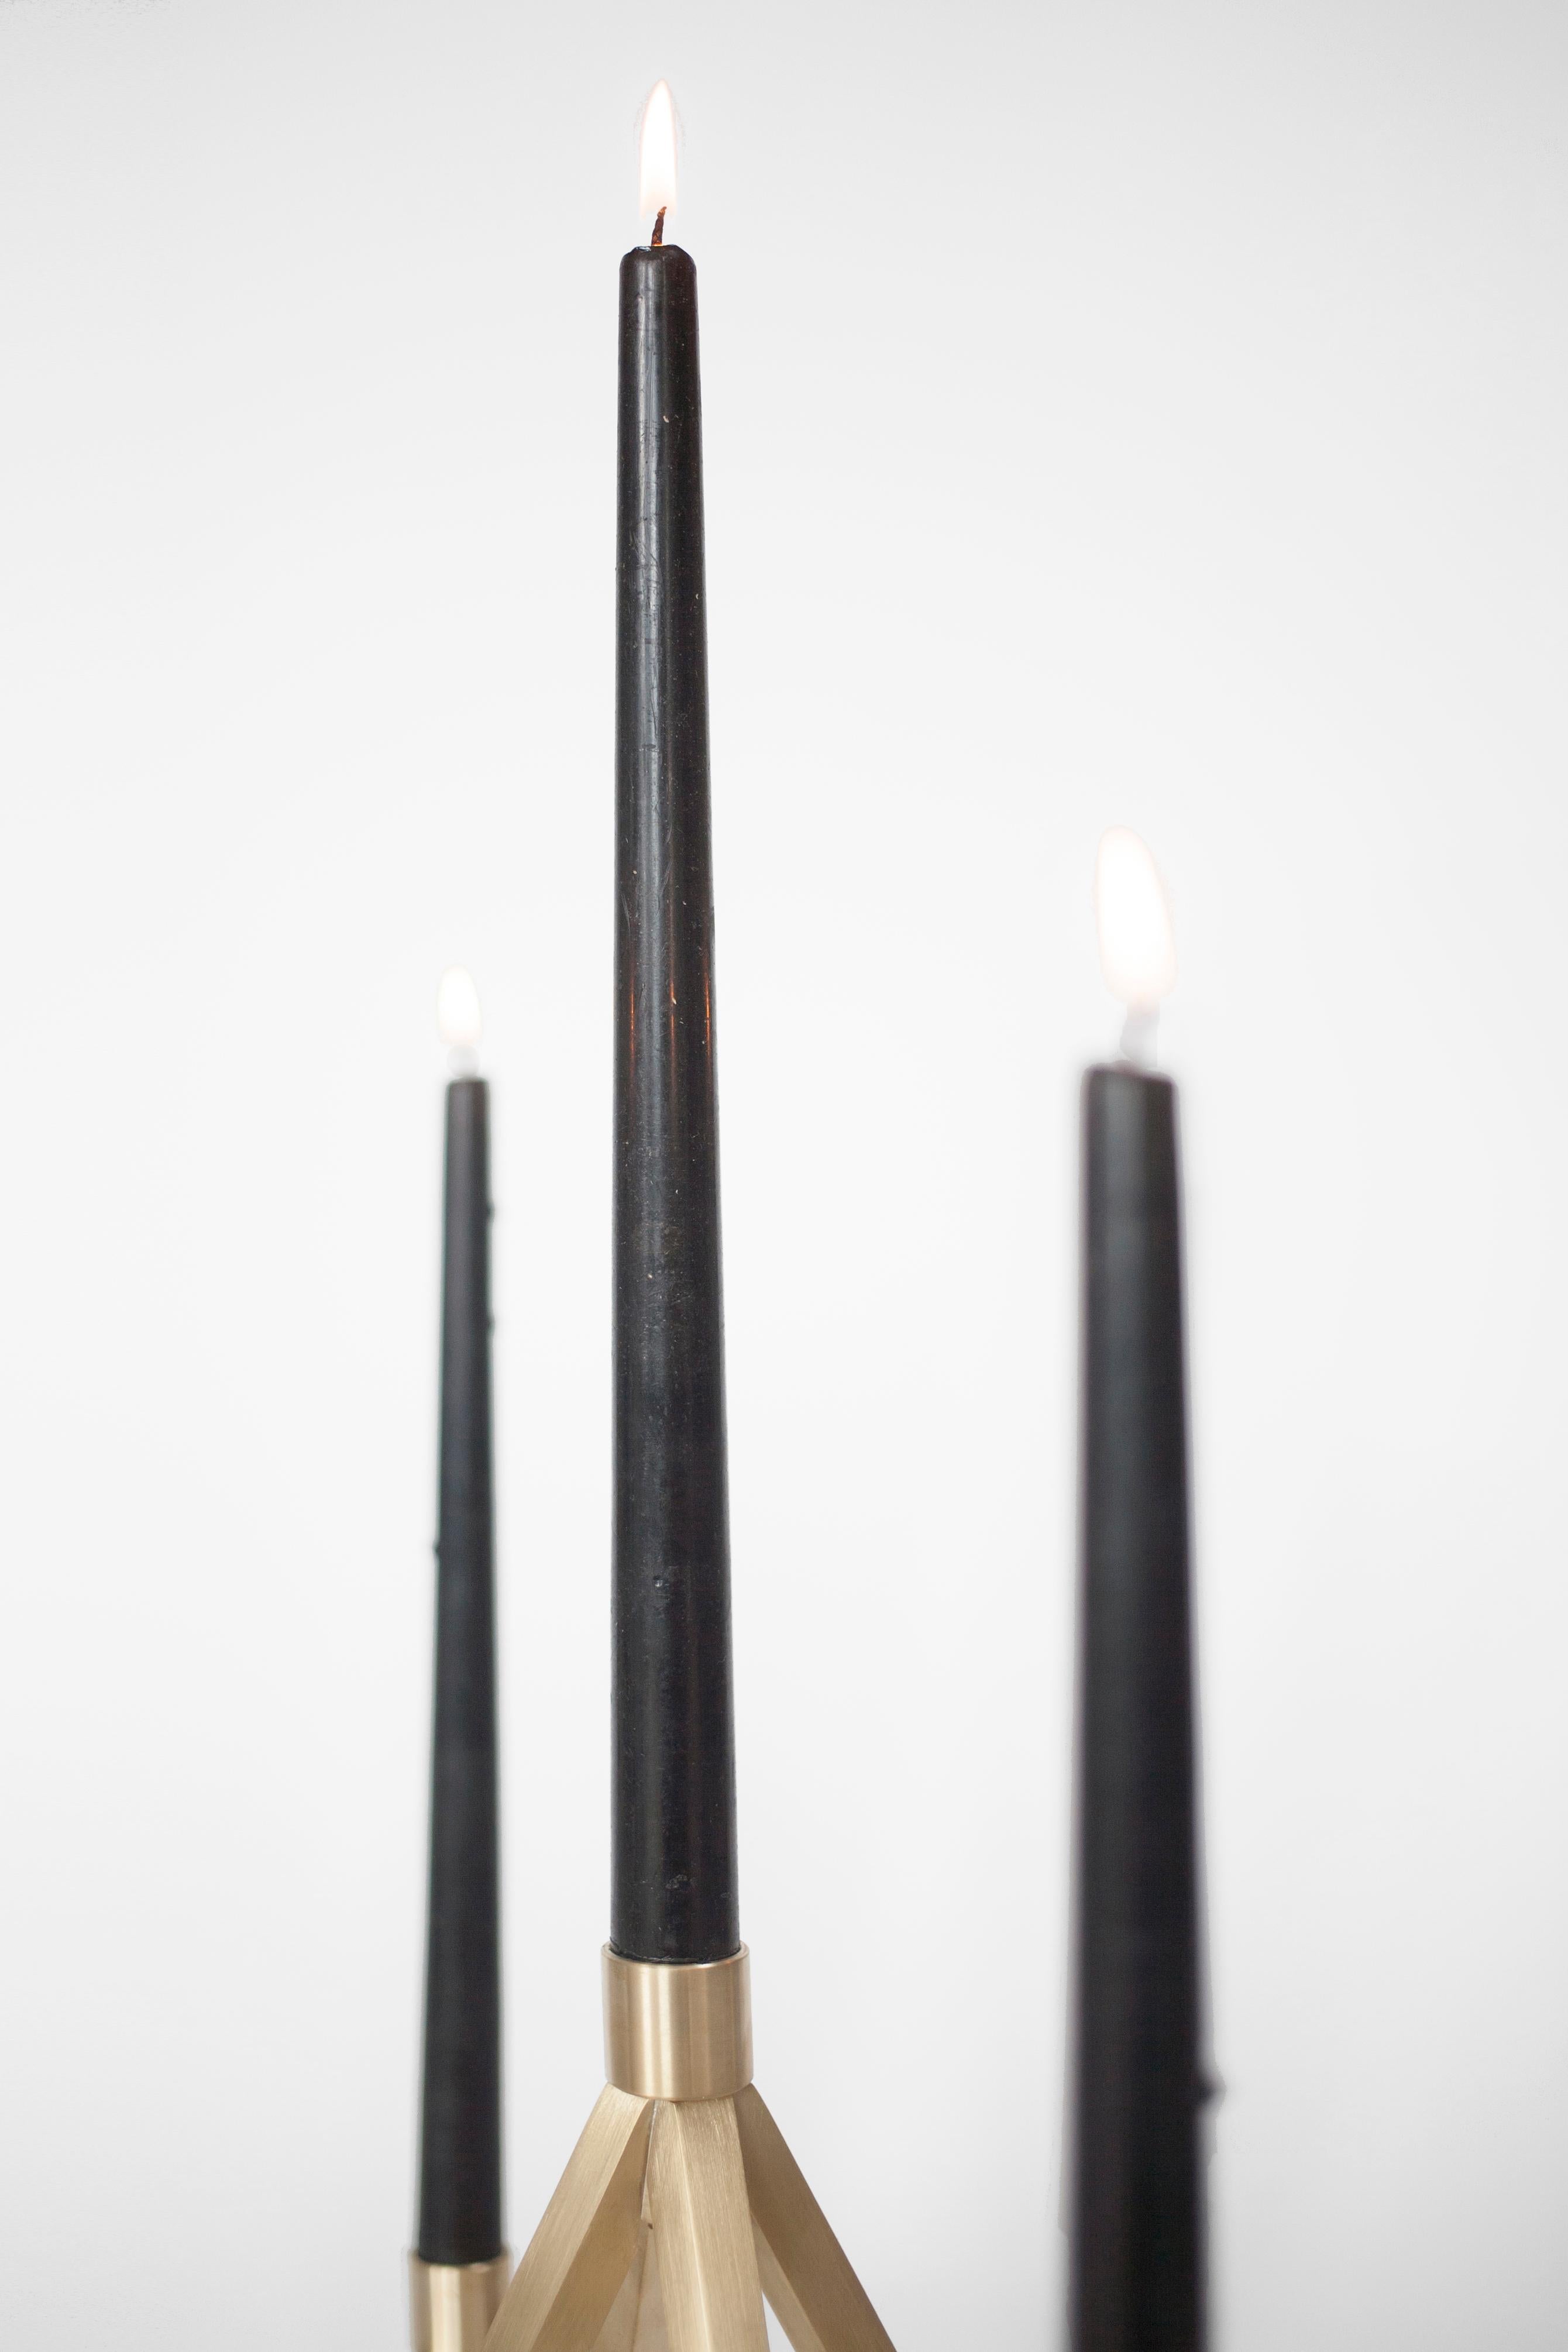 Brushed Contemporary 'Pagan' Candelabra by Material Lust, 2014 For Sale